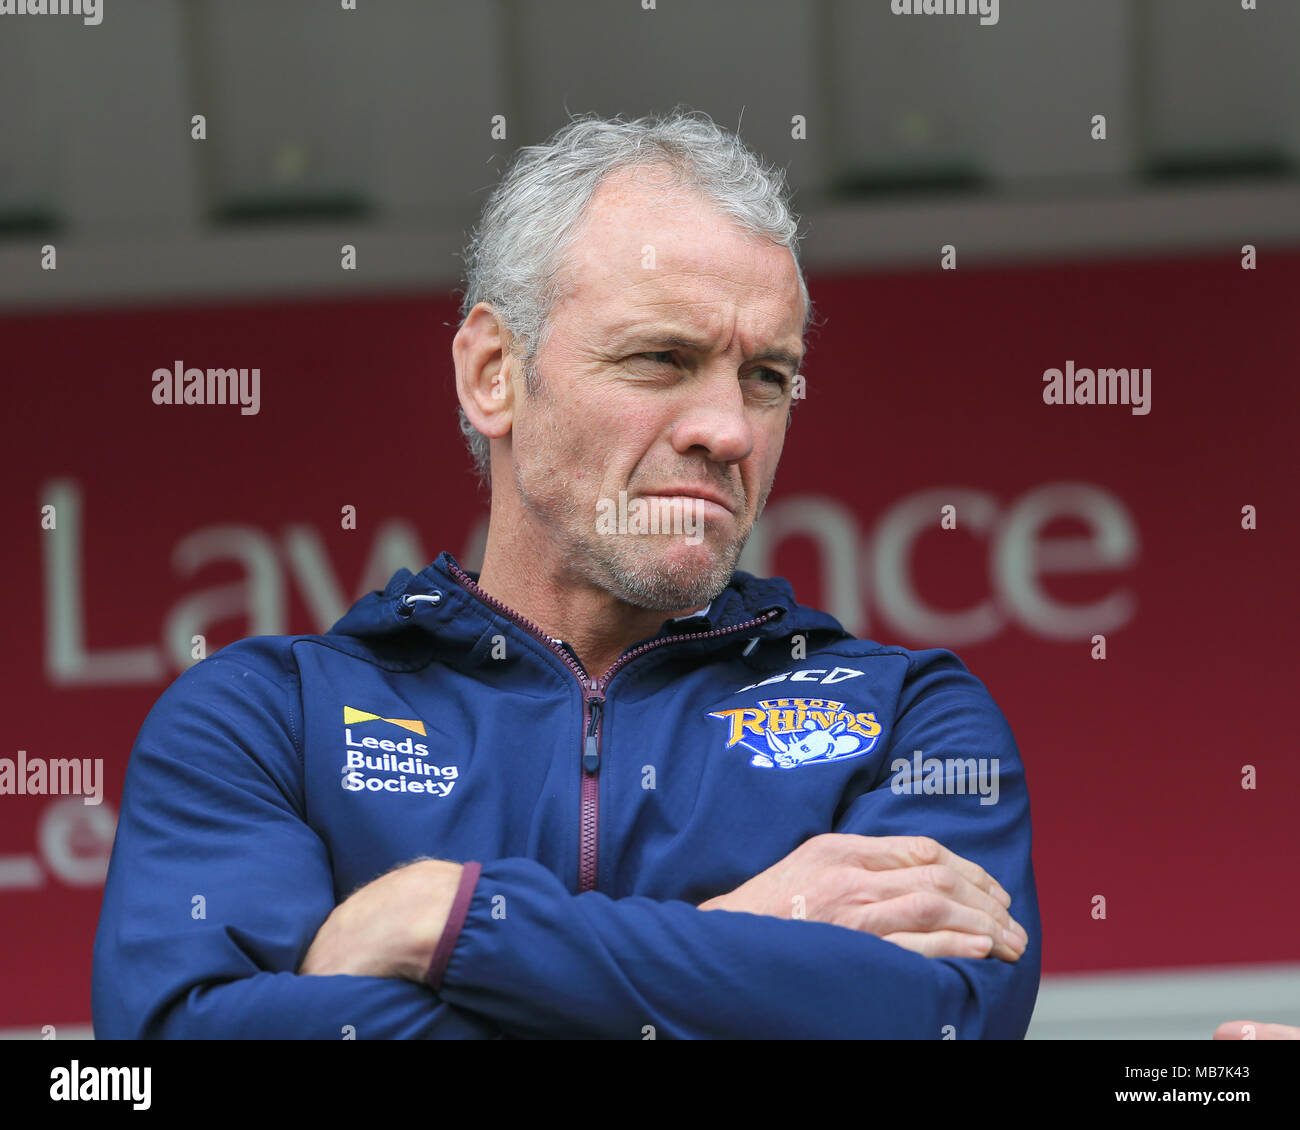 Wakefield, UK. 8th April 2018, Beaumont Legal Stadium, Wakefield, England; Betfred Super League rugby, Wakefield Trinity v Leeds Rhinos; Brian McDermott head coach of Leeds Rhinos checking out the pitch ahead of todays game Credit: News Images/Alamy Live News Credit: News Images/Alamy Live News Stock Photo